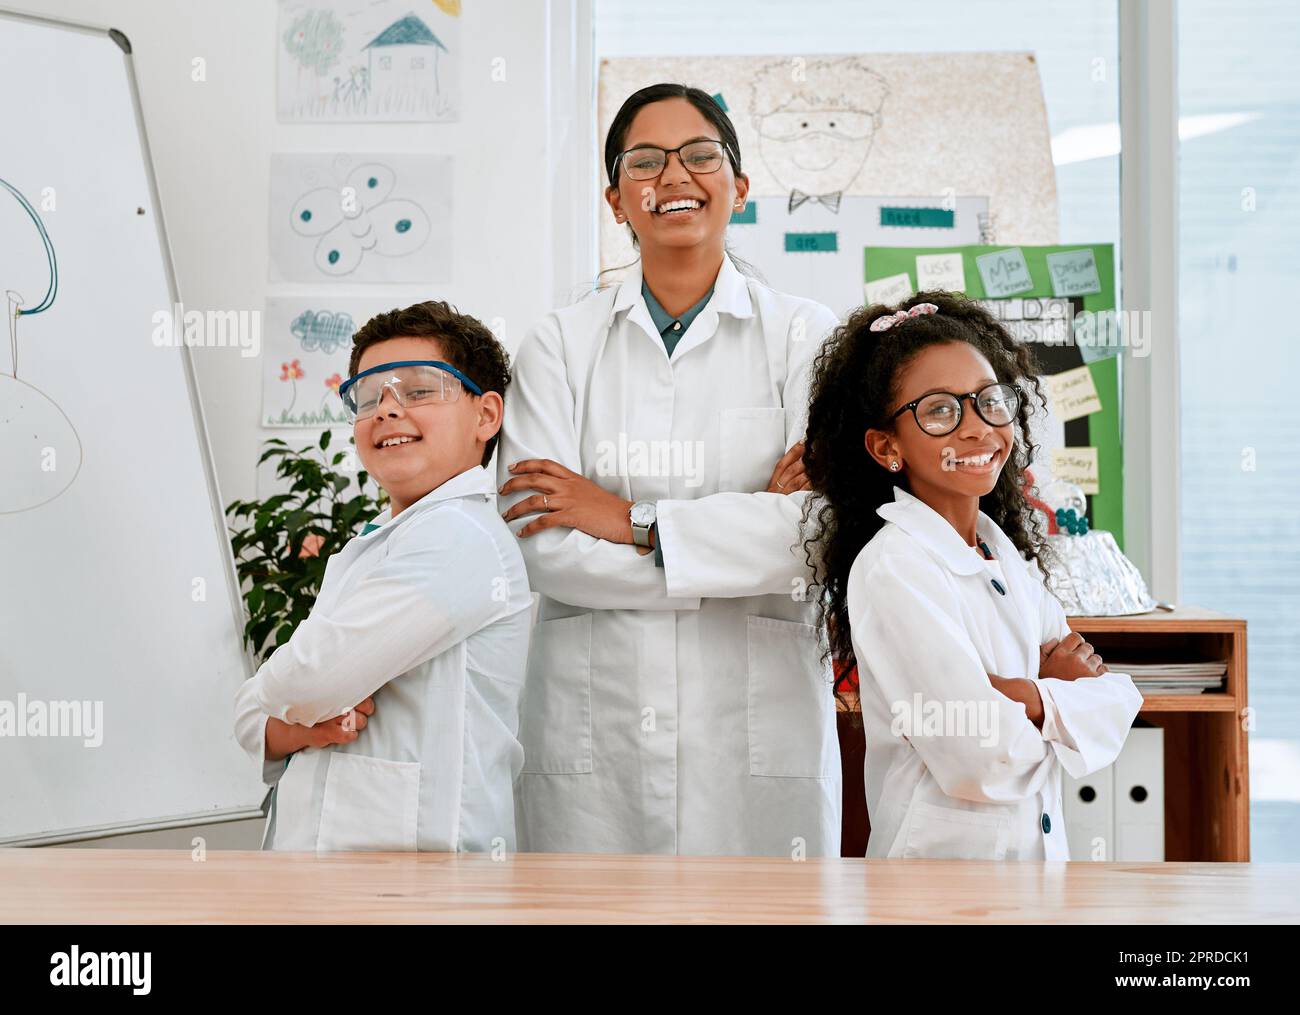 We came to learn and have lots of fun. Portrait of a confident little boy and girl standing together with their teacher in science class at school. Stock Photo